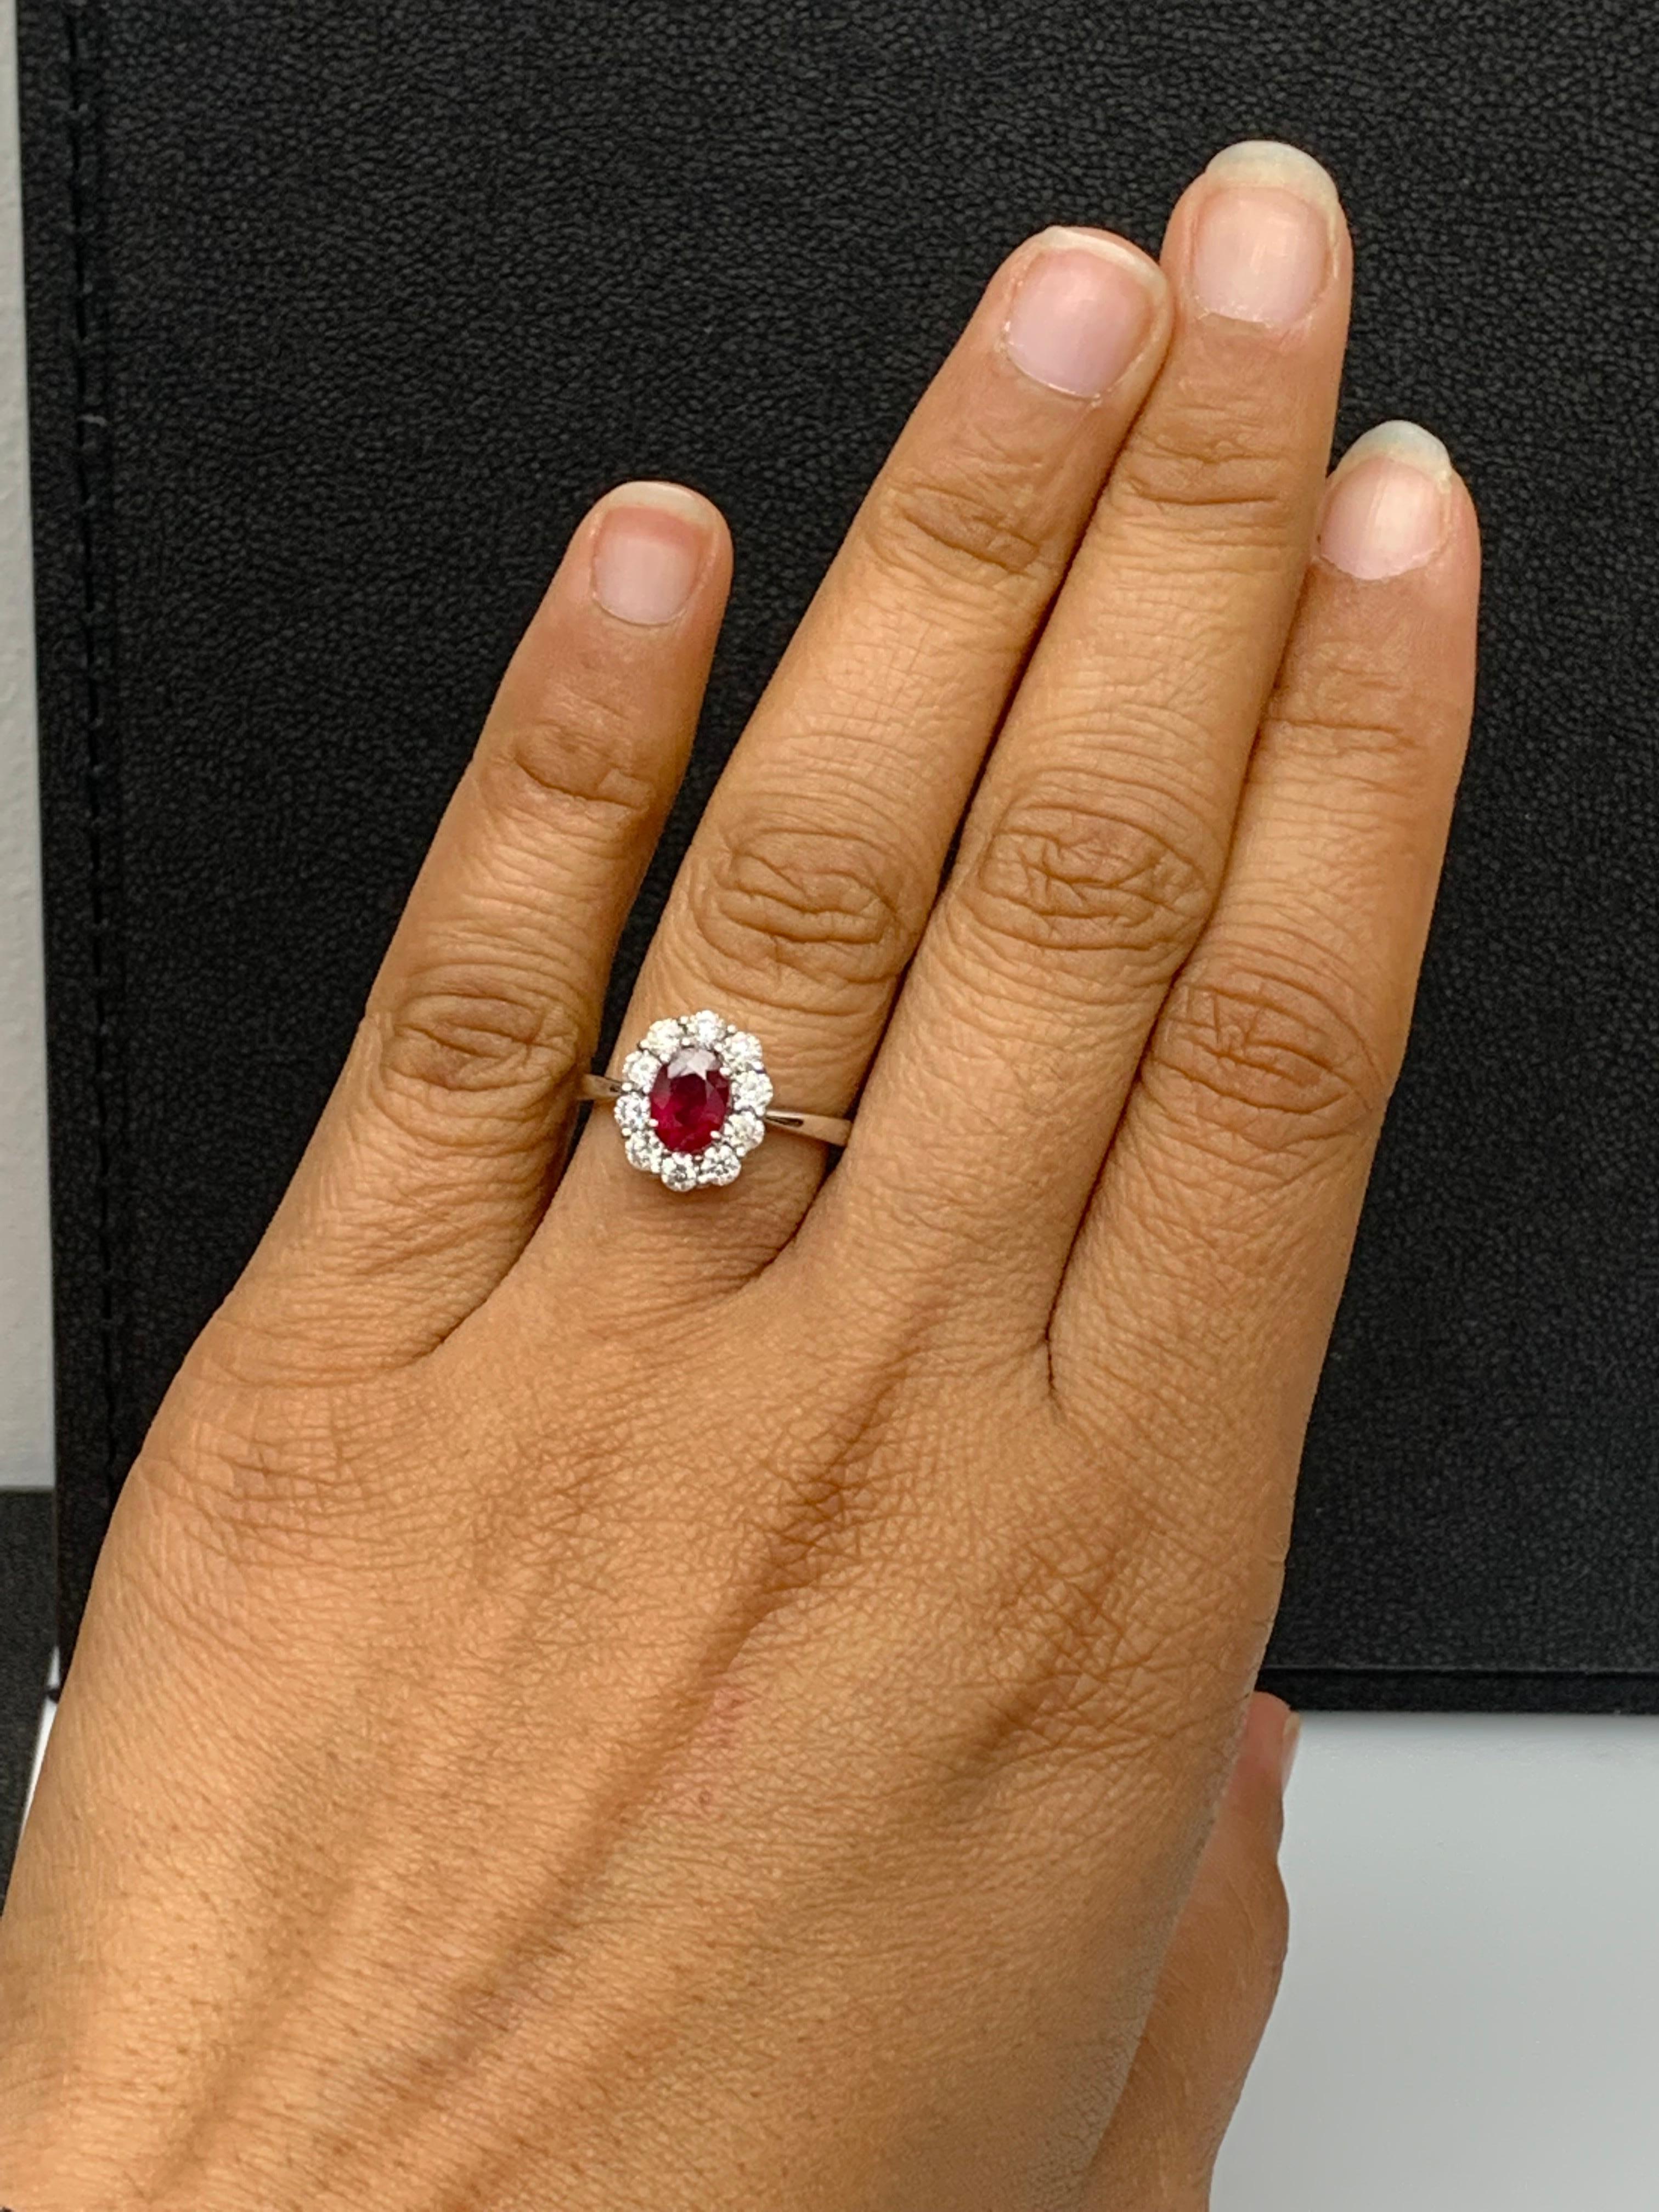 A stunning well-crafted engagement ring showcasing a 0.92-carat oval cut Ruby. Flanking the center diamond are perfectly matched brilliant cut 10 diamonds weighing 0.74 carats in total, set in a polished 18K White Gold mounting. Handcrafted in our